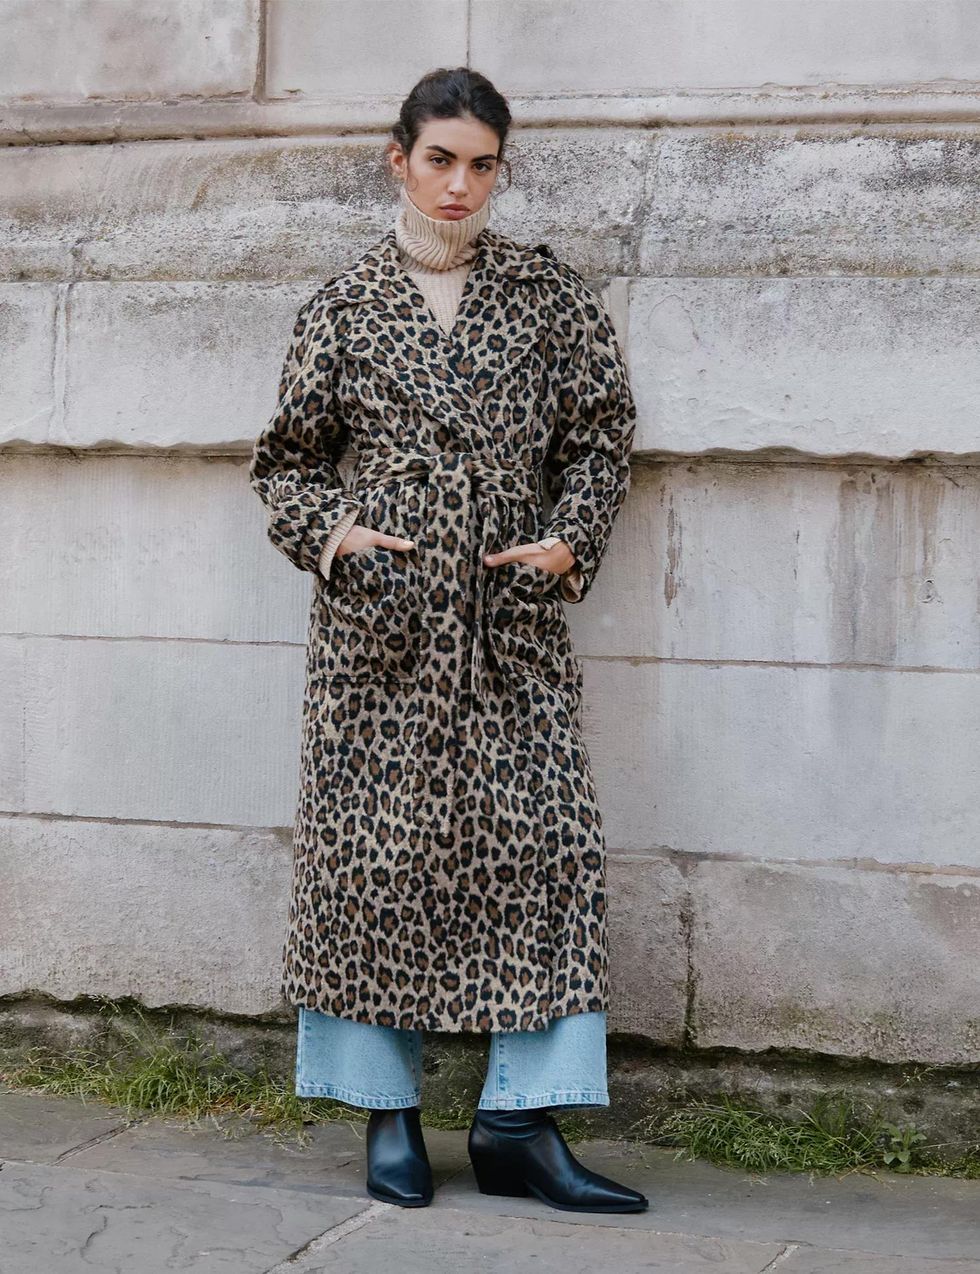 How To Pick A Leopard Print Shirt Dress For The Office